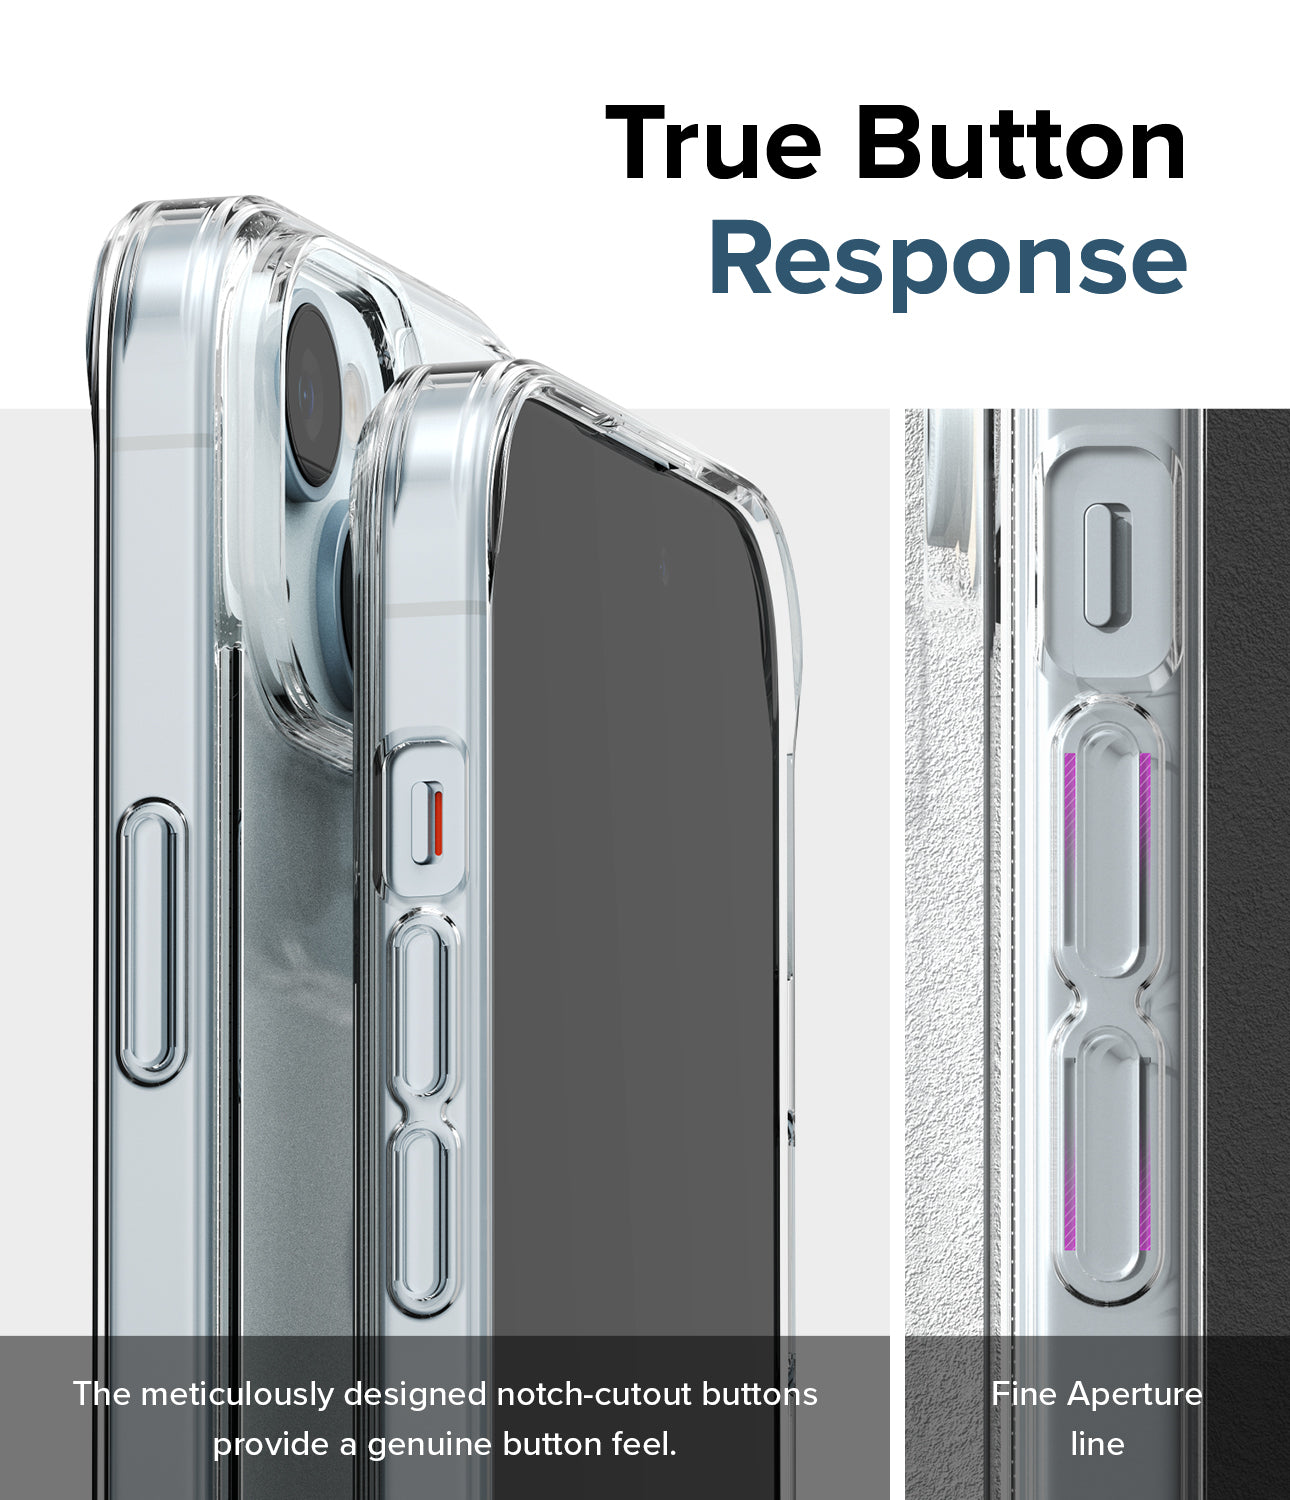 iPhone 15 Case | Fusion - Clear / Matte Clear